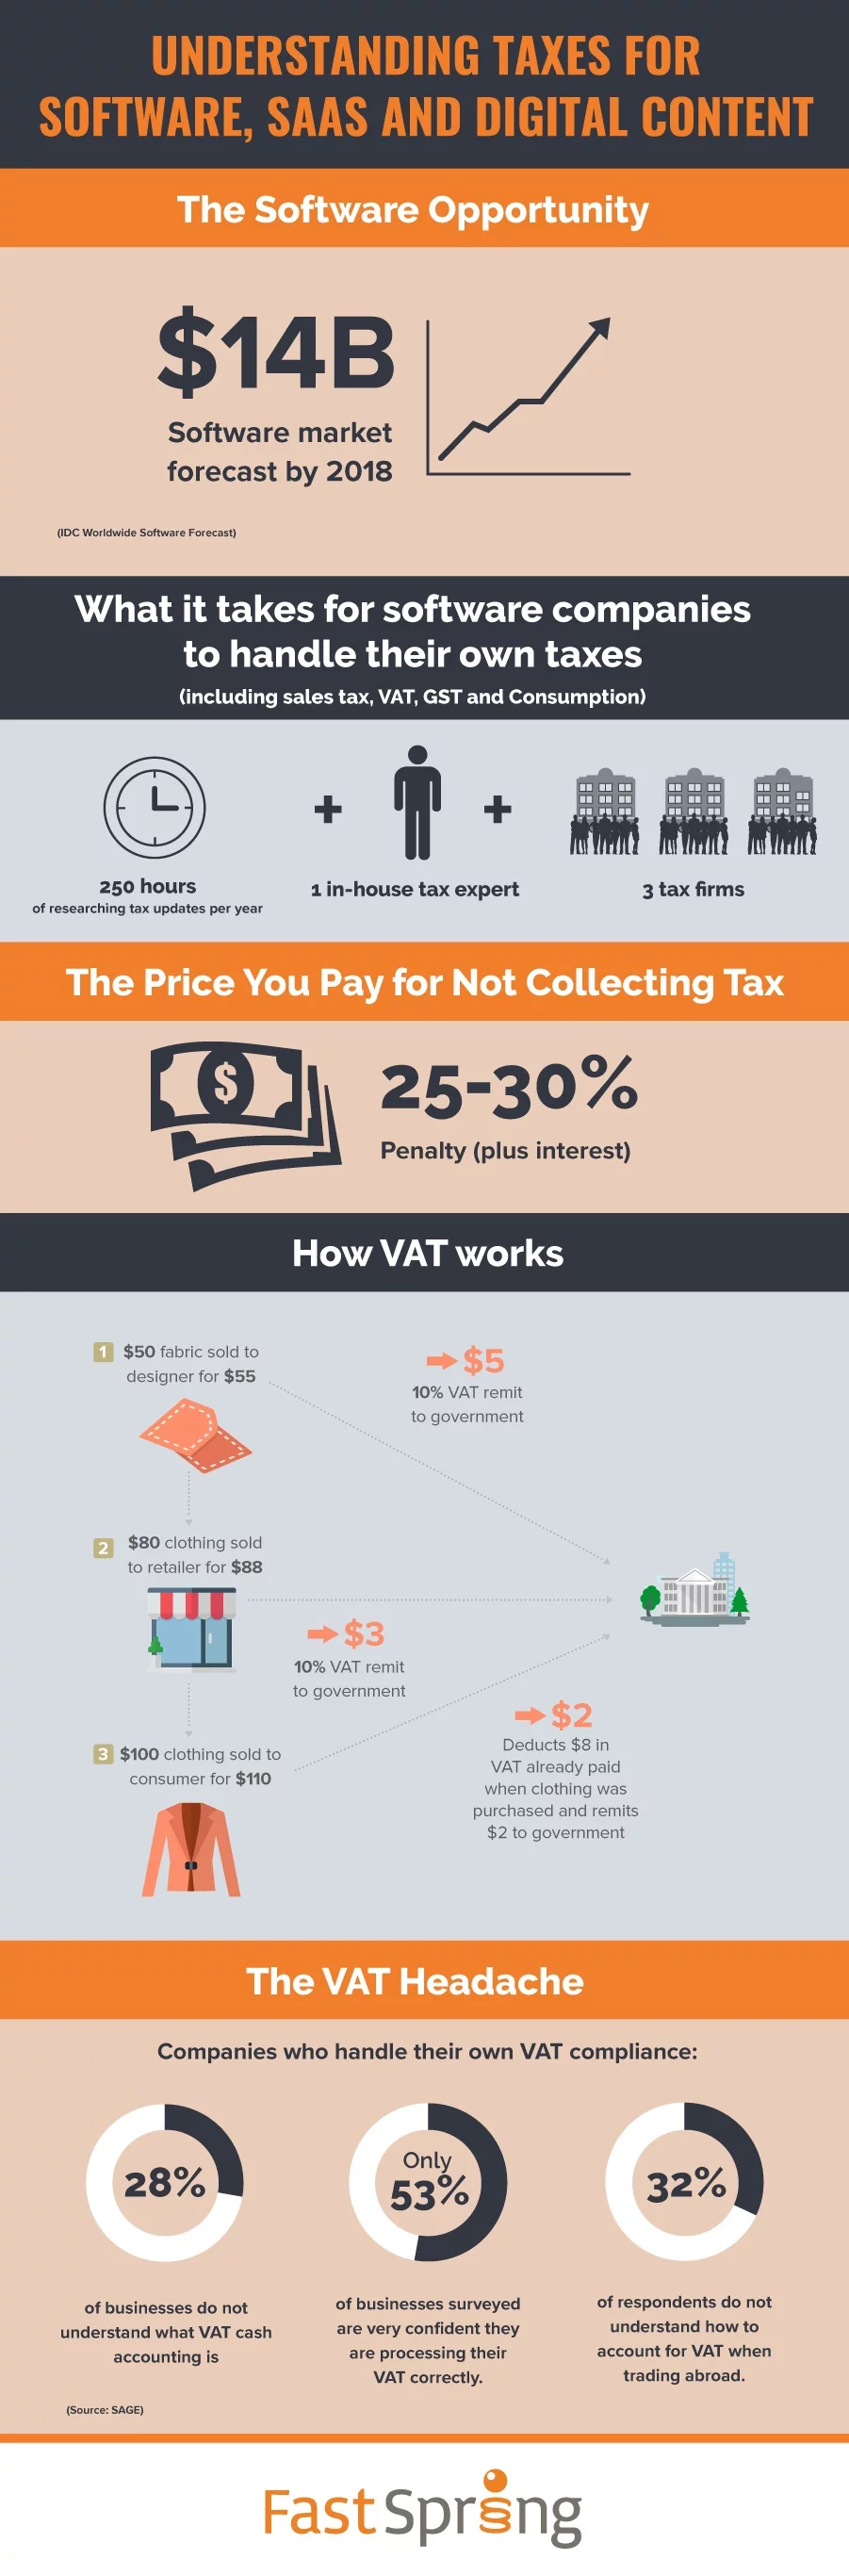 Fastspring Software, SaaS, and Digital Content Tax Infographic